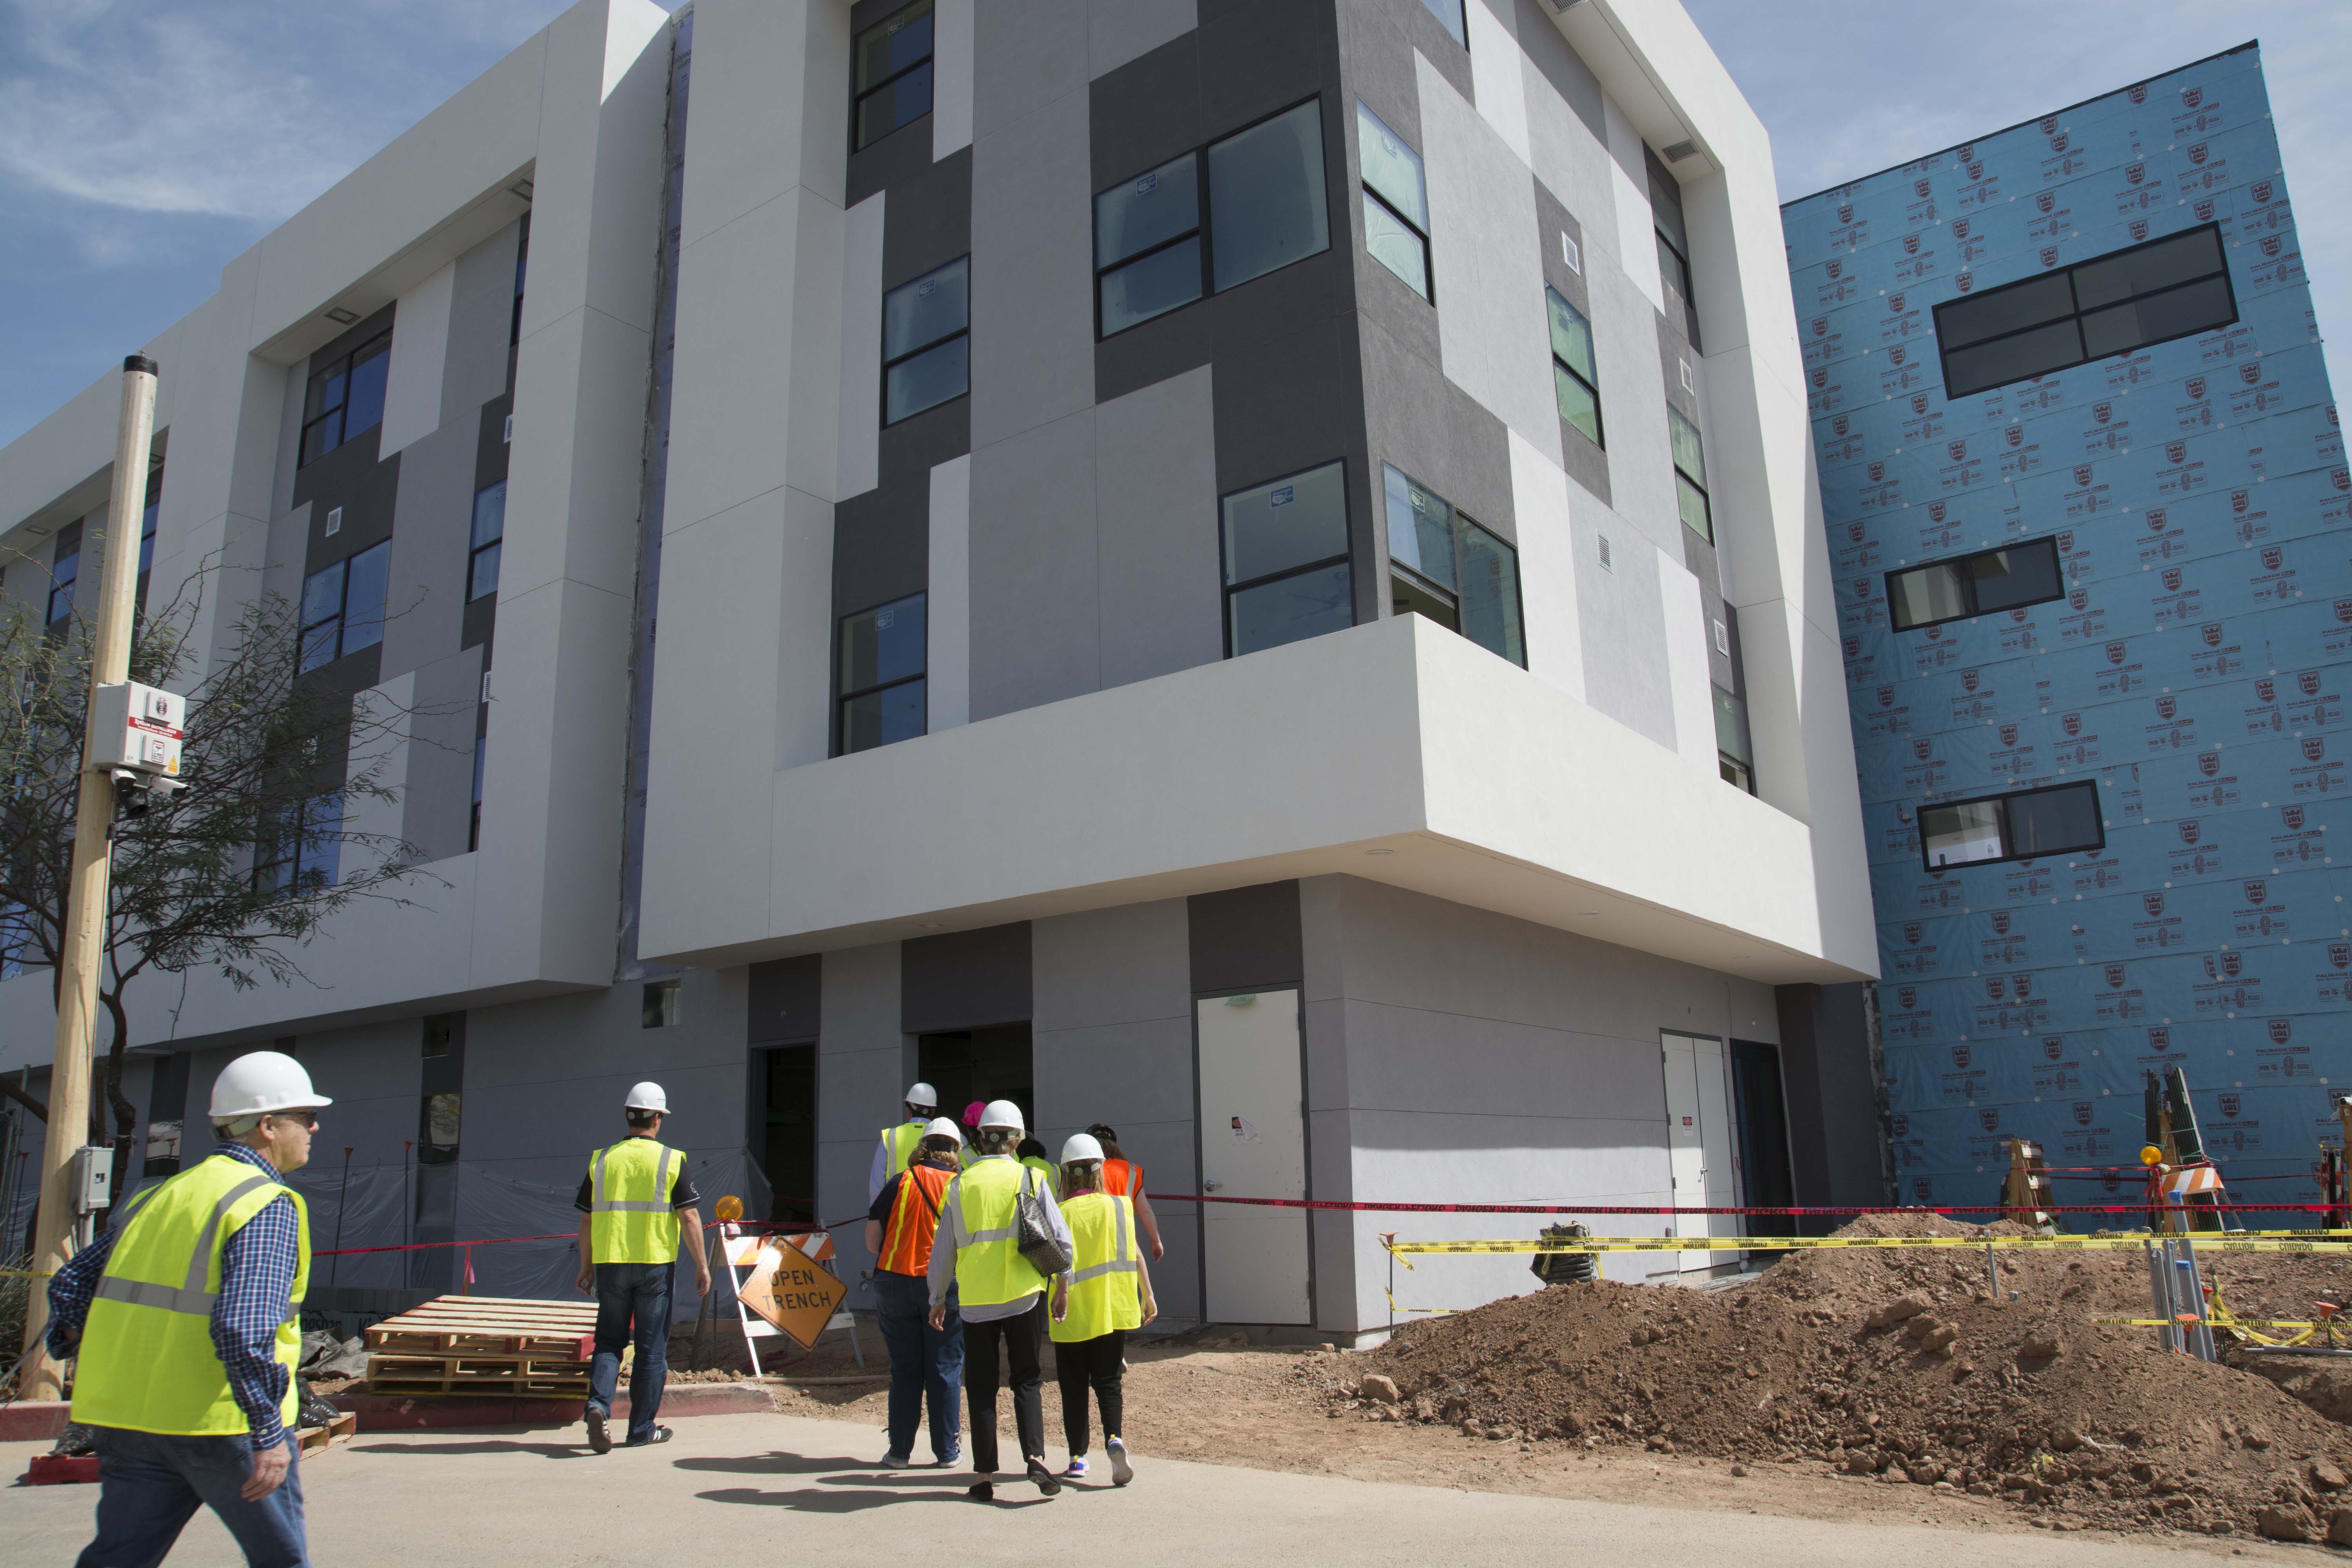 PNS: New Phoenix Apartments Built for Residents with Autism